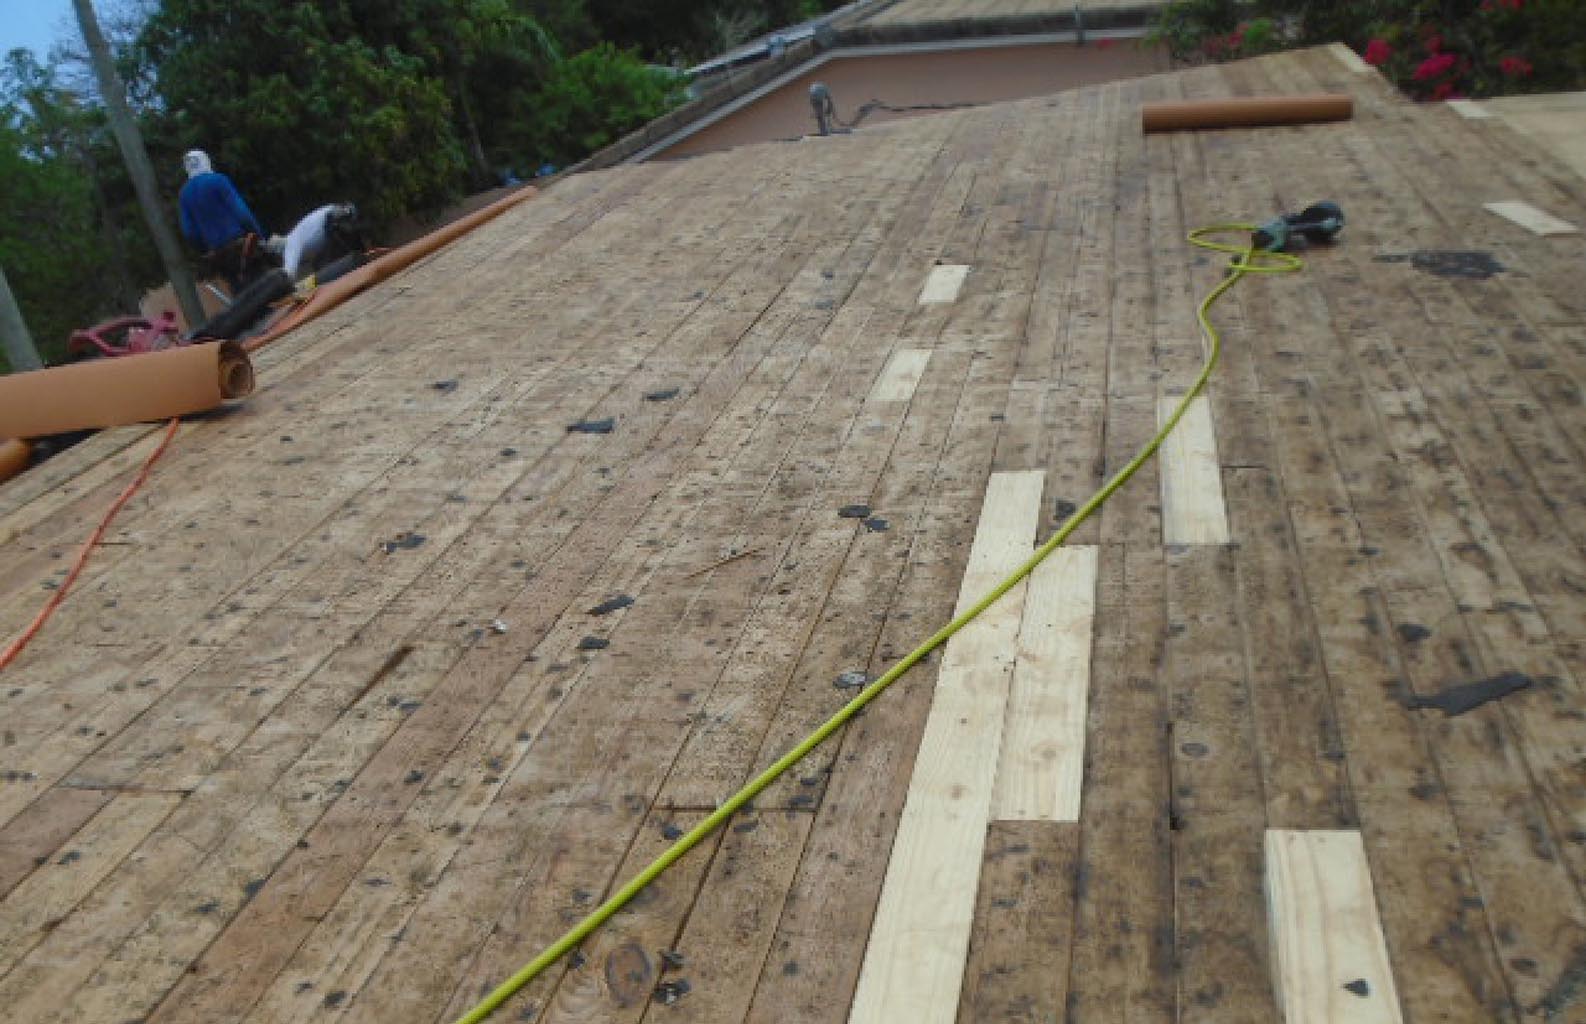 Repairs to rotted decking / sheathing